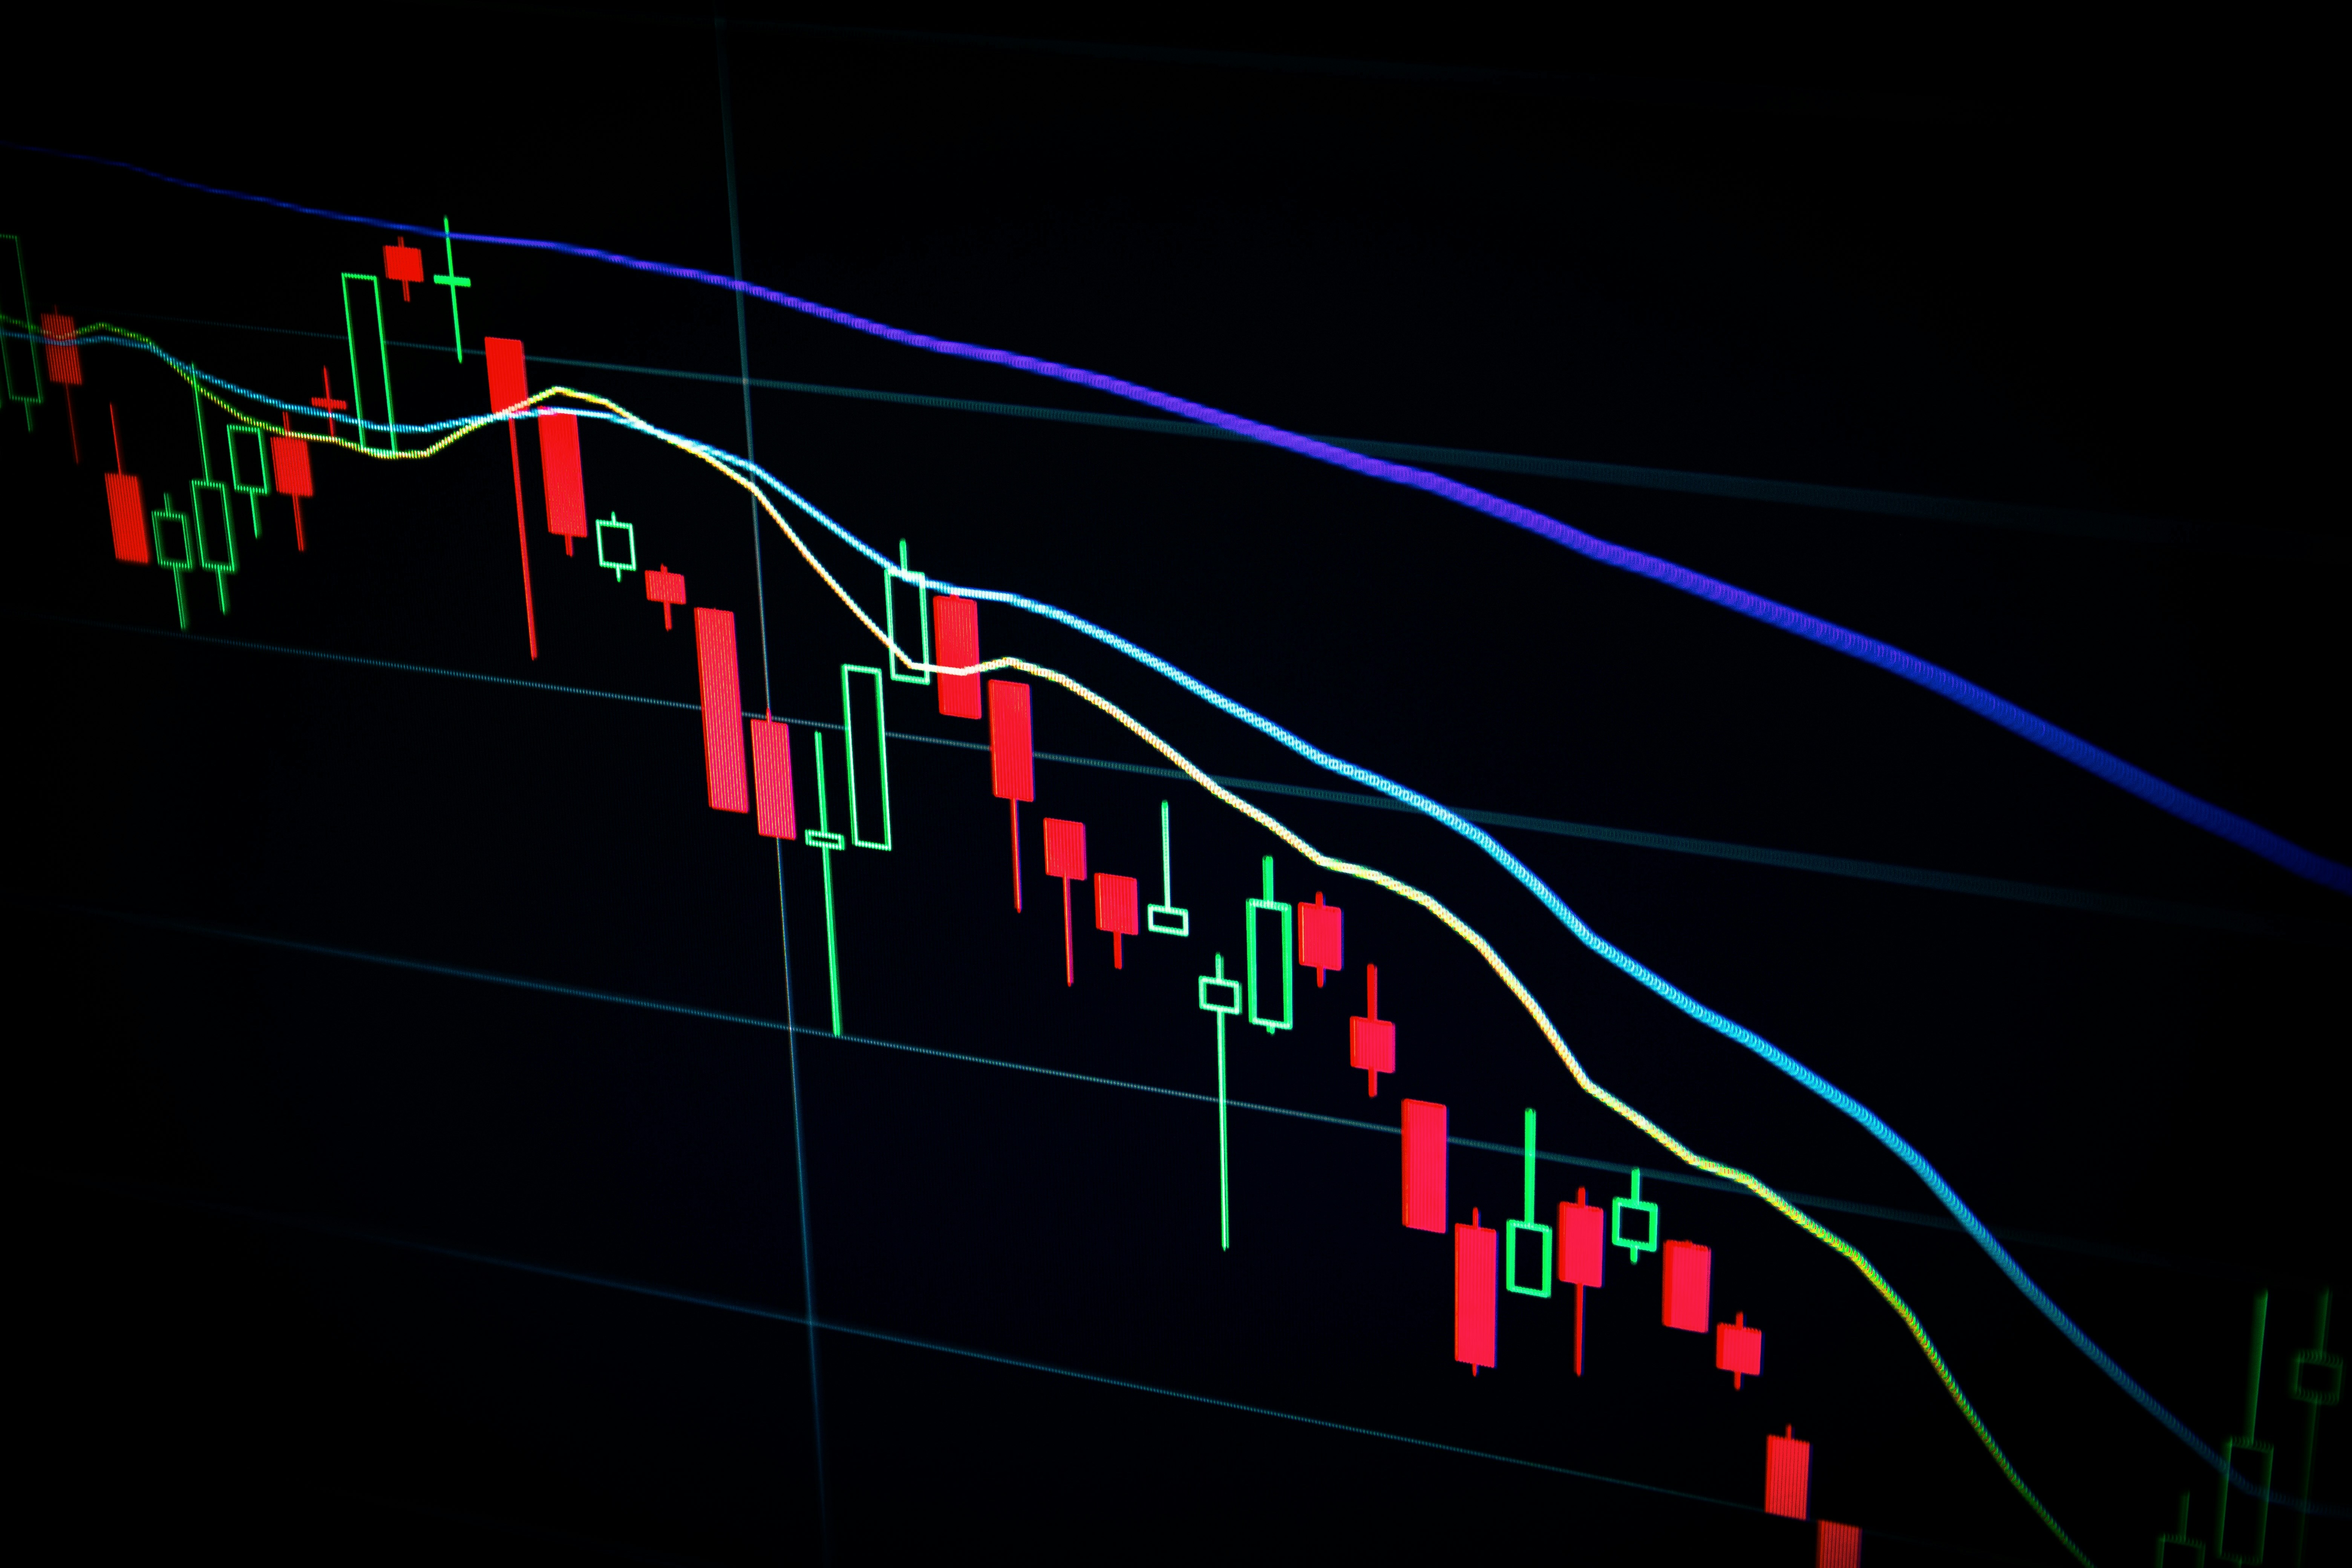 Bitcoin Traders Spread “Buy The Dip” As Bitcoin Plunges Below $66,000